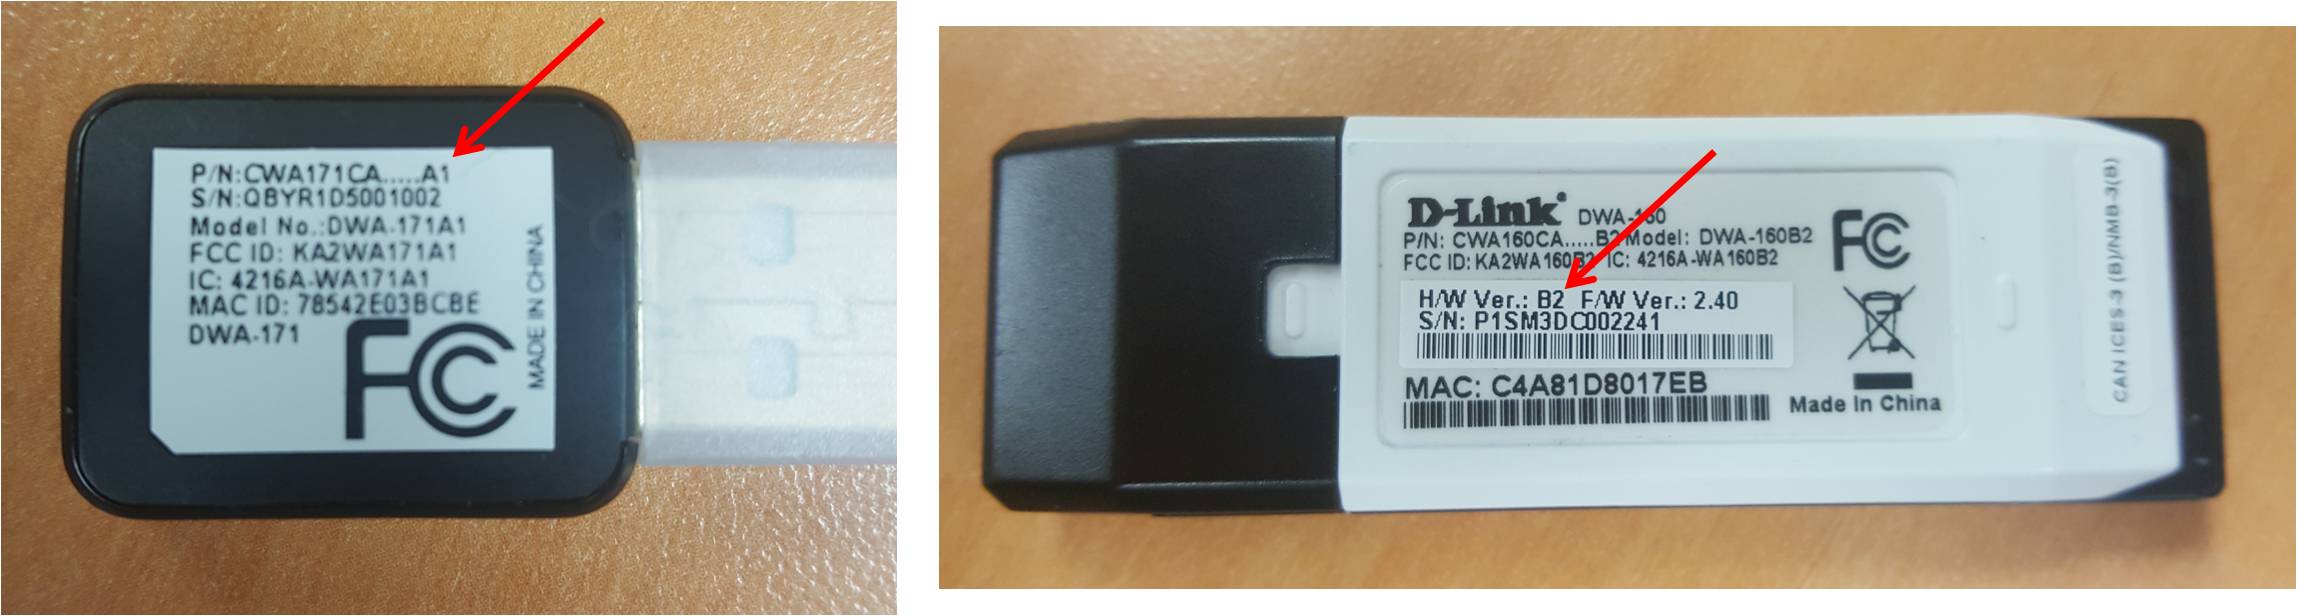 D Link Wireless N Nano Usb Adapter Dwa 131 Review Youtube